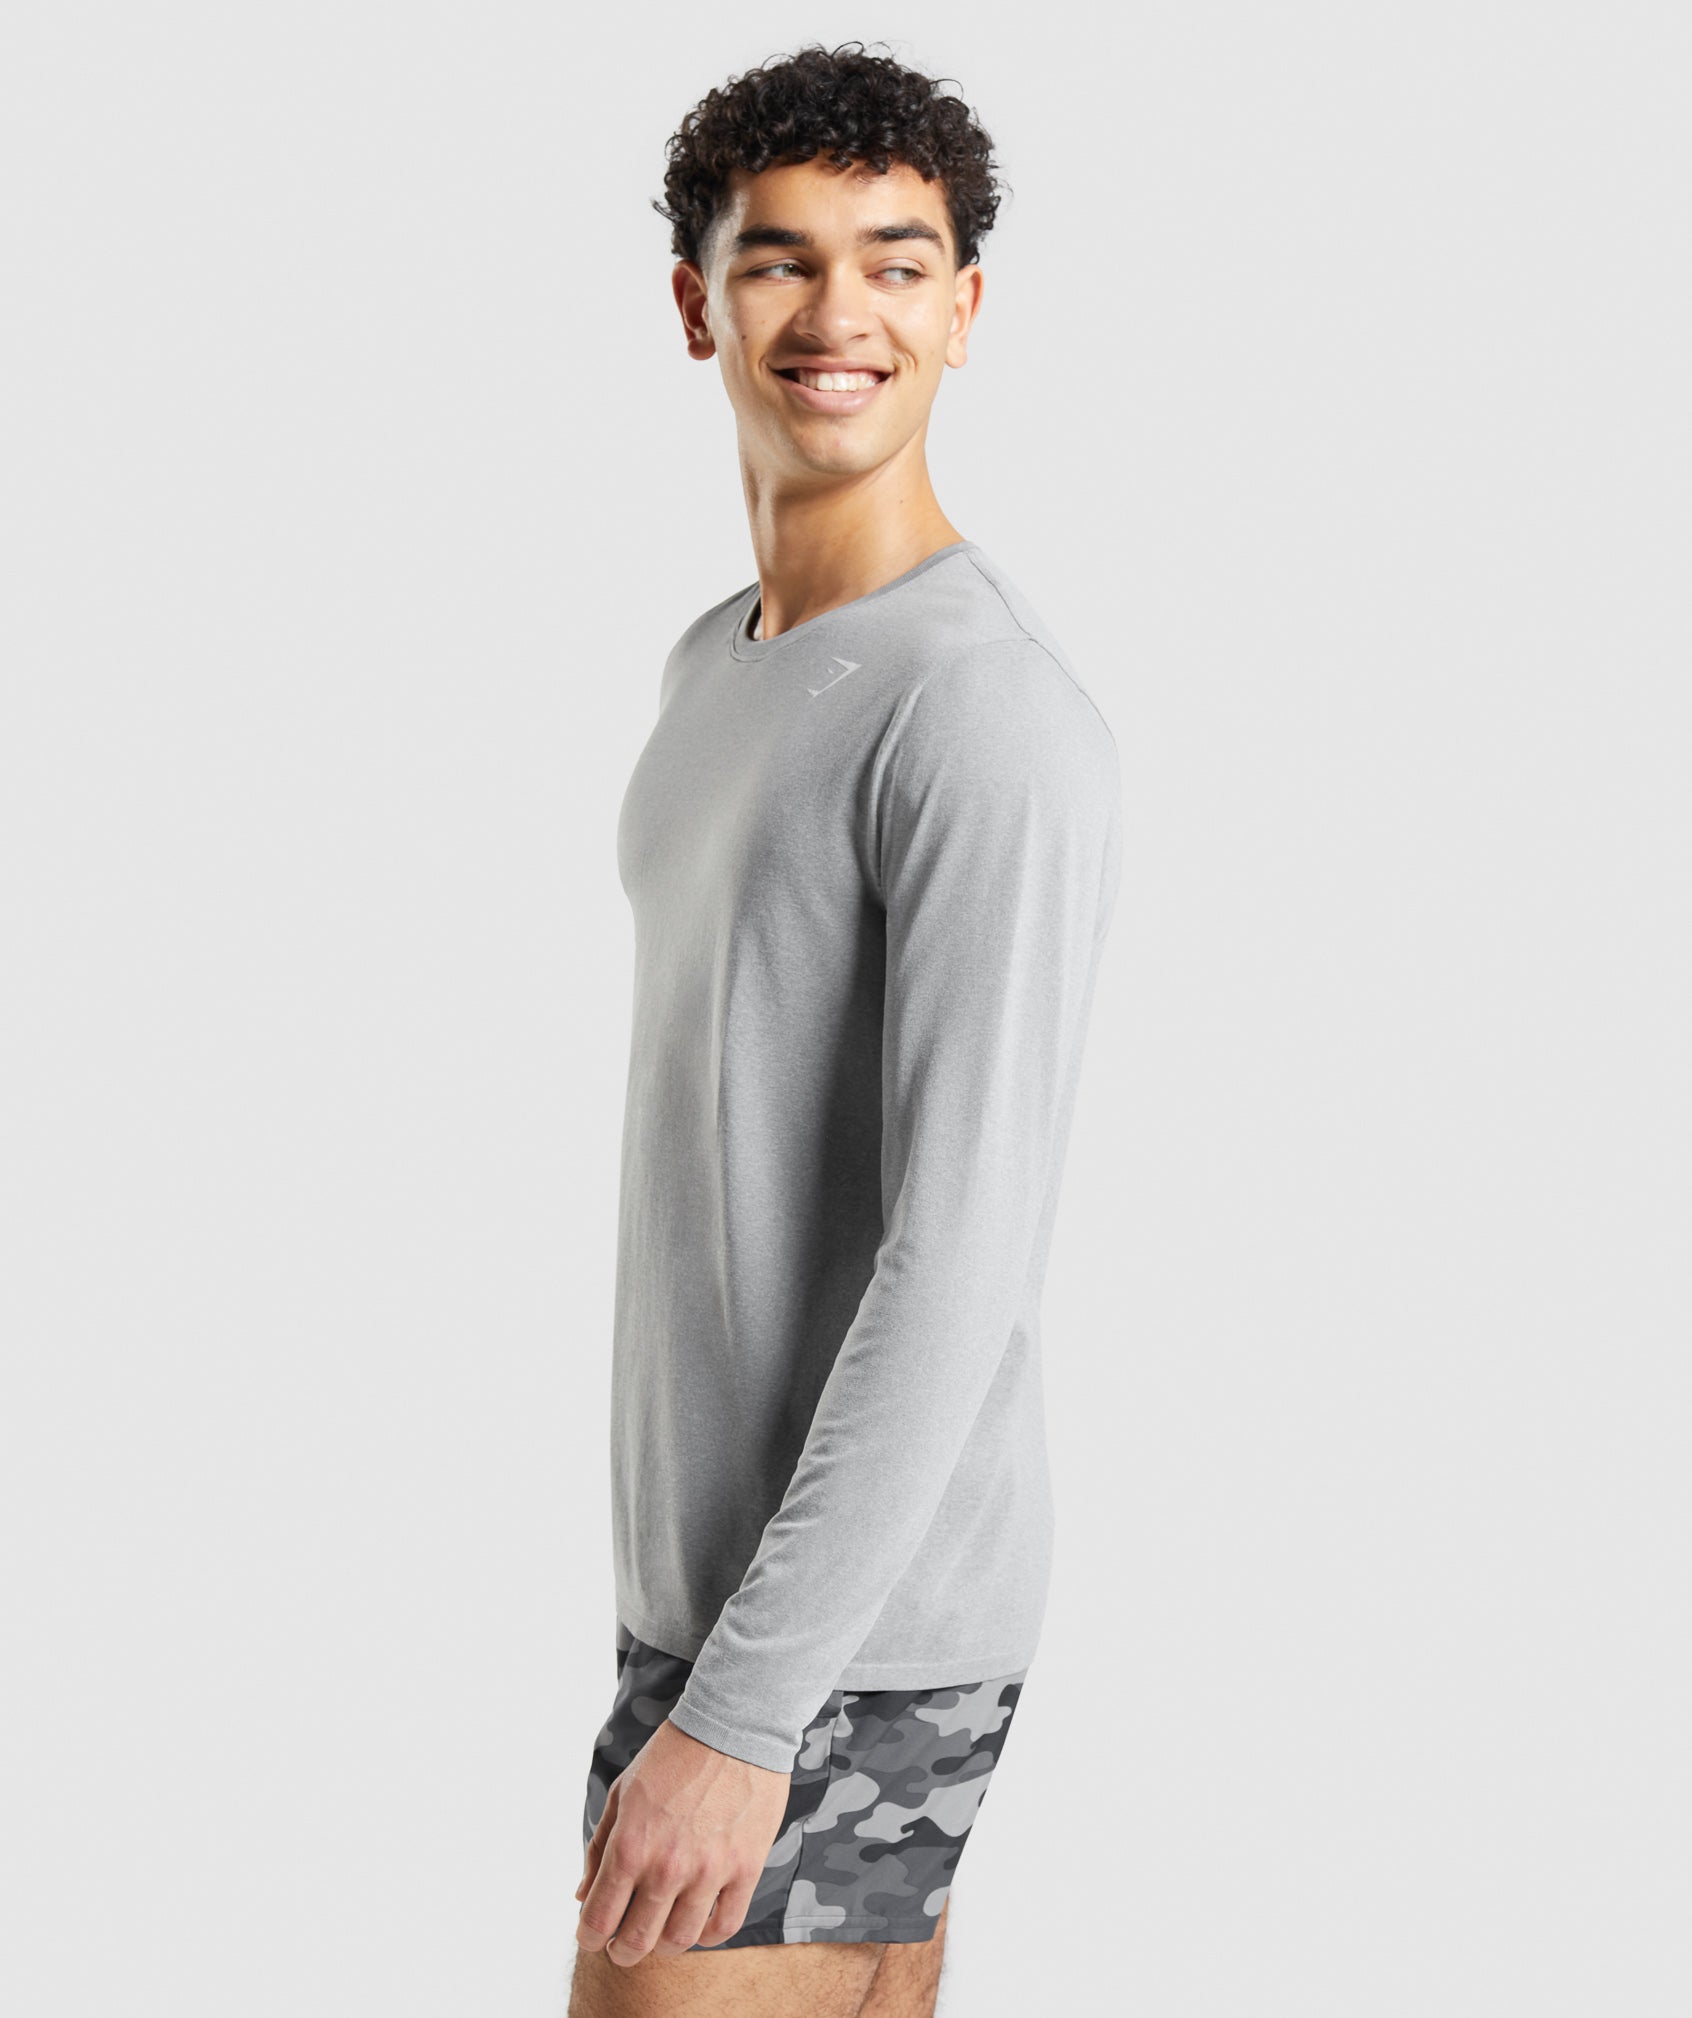 Arrival Seamless Long Sleeve T-Shirt in Grey - view 3